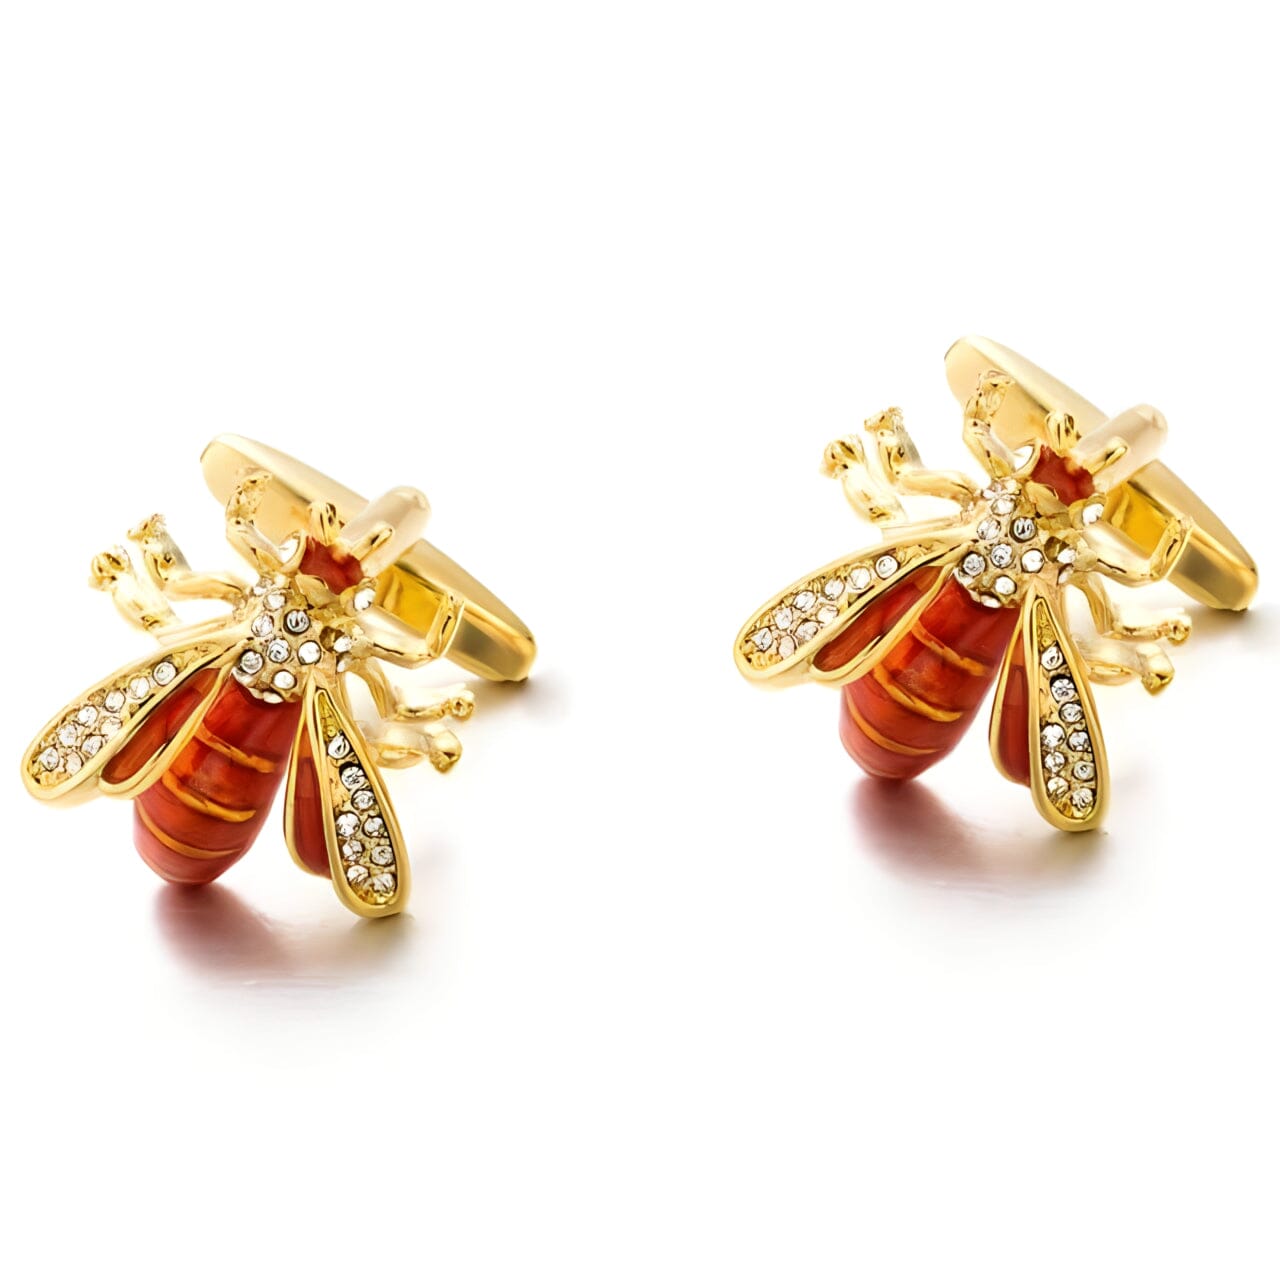 The Moneybee Luxury Cuff Links - Multiple Colors NON-BRUCE Gold 